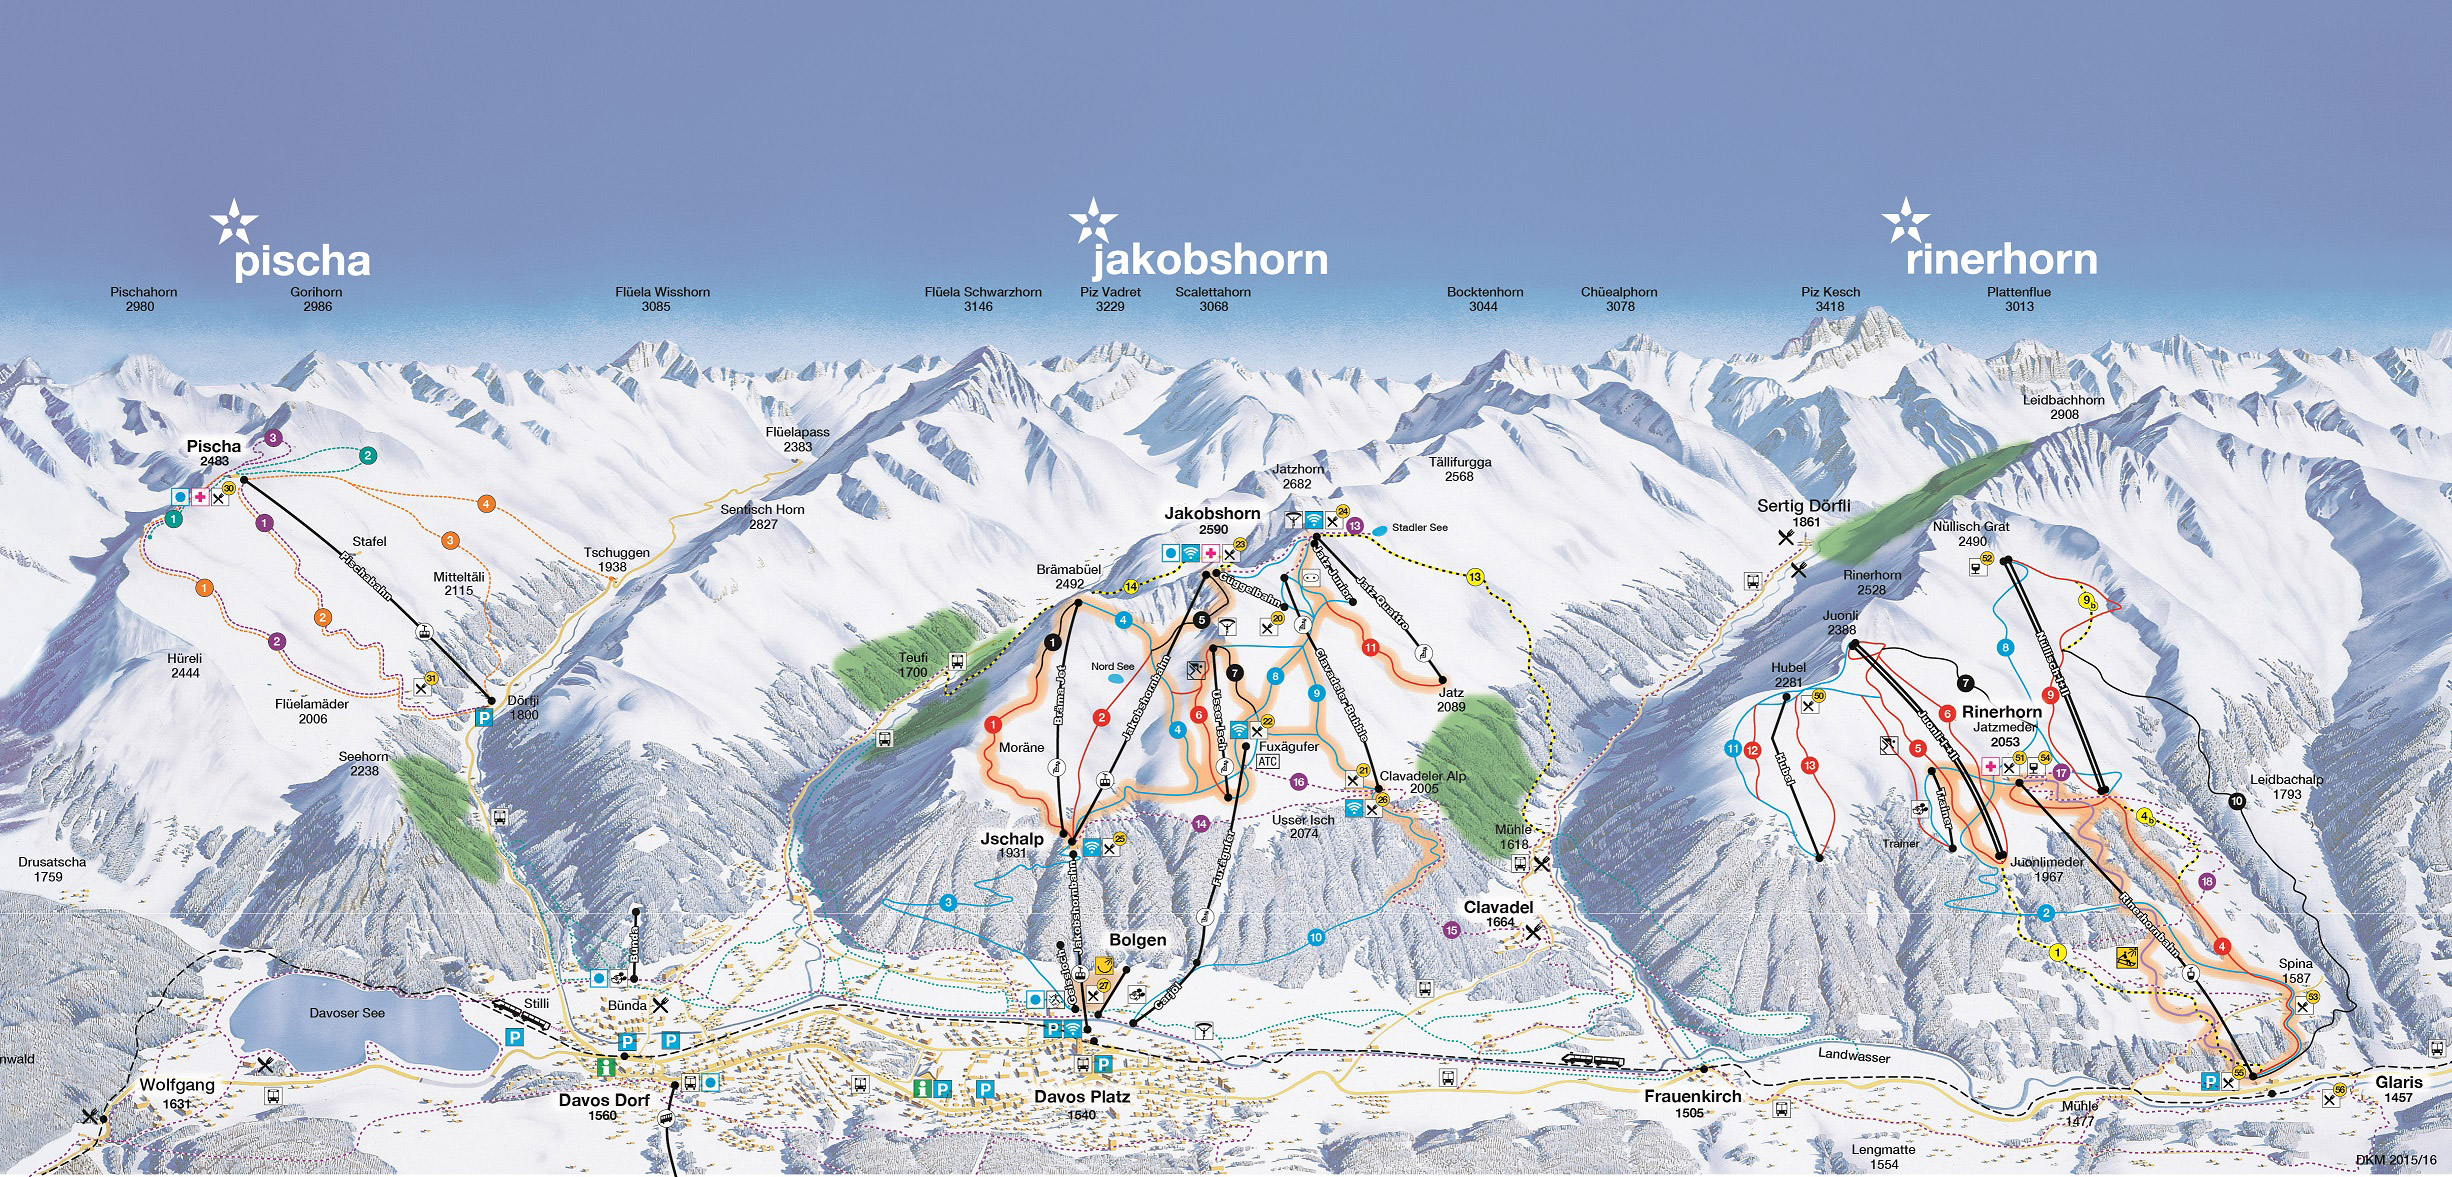 Davos Klosters Piste Map Free Downloadable Piste Maps in Brilliant  how to ski davos intended for Dream